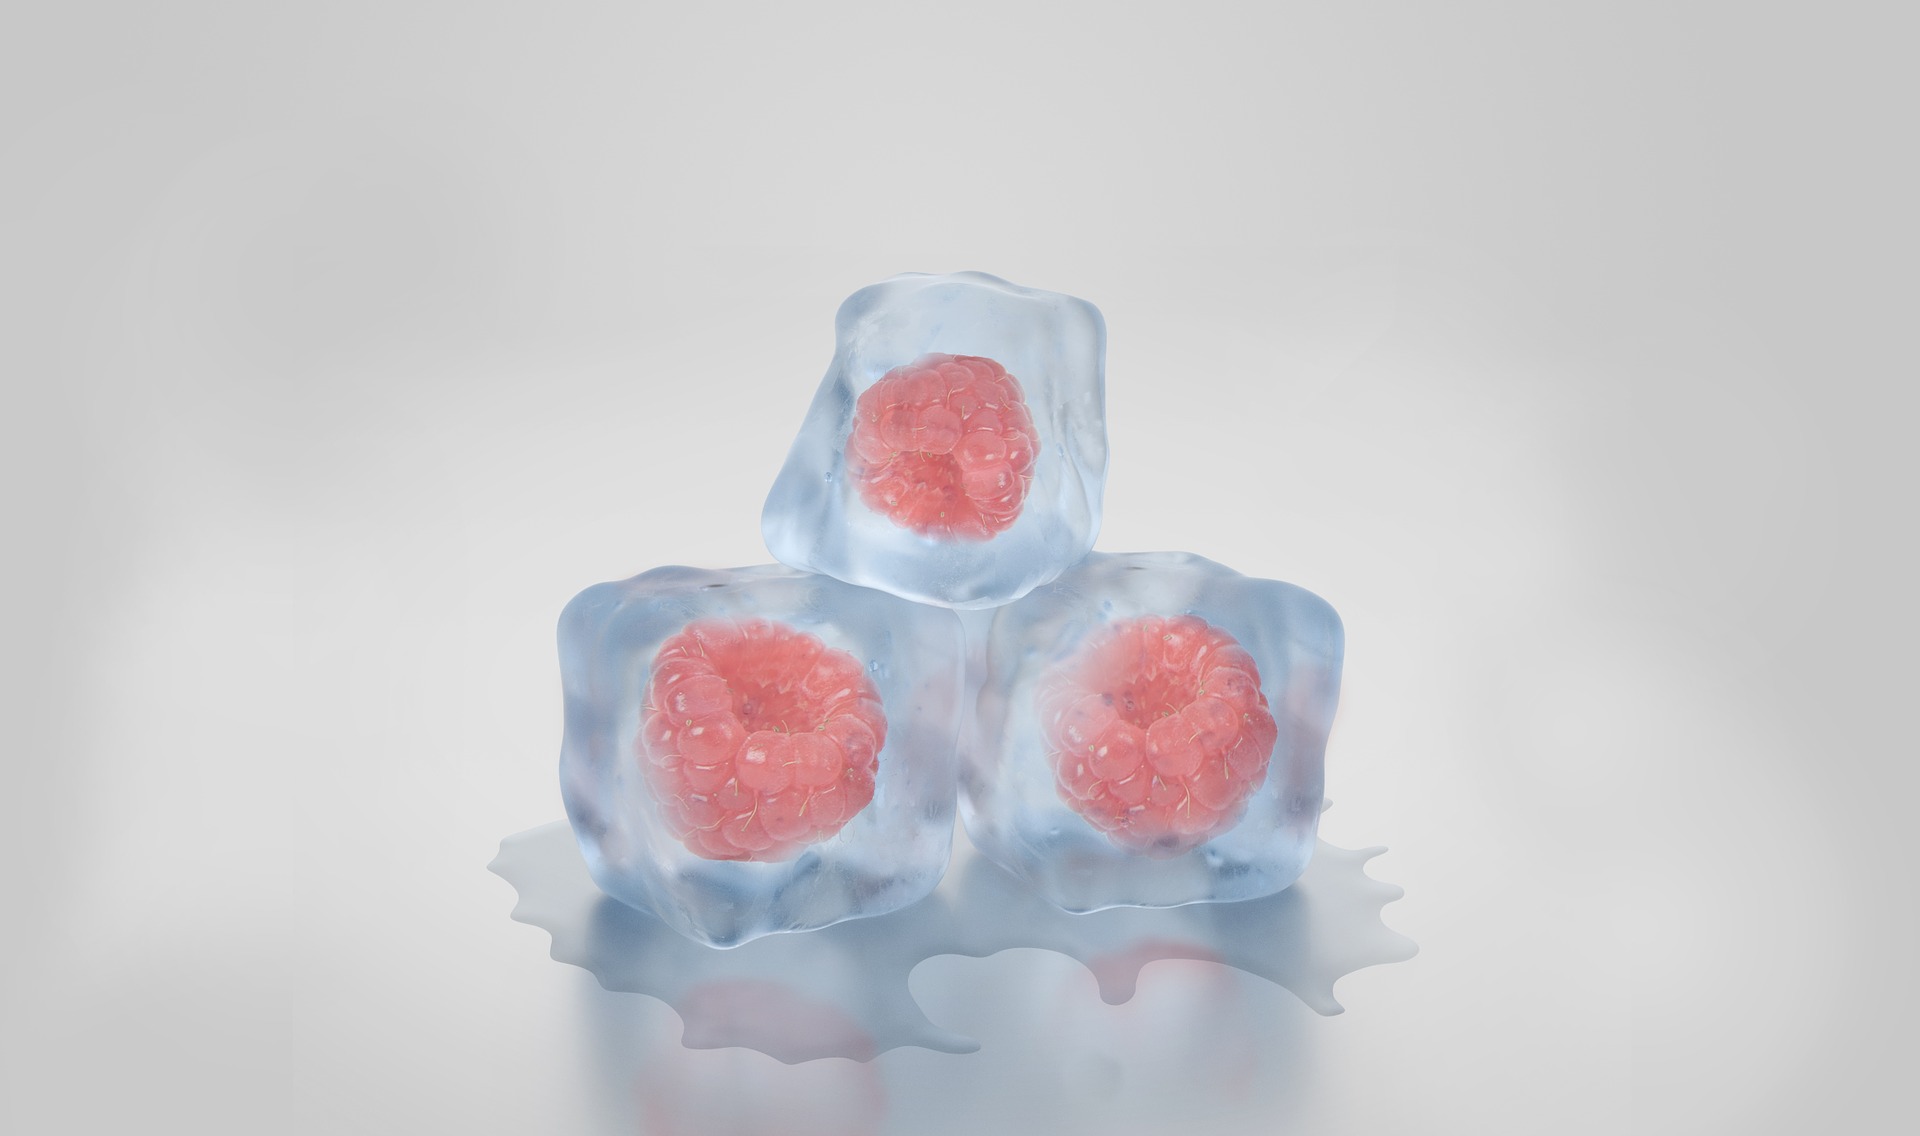 unique baby shower games. an image of raspberries frozen inside of ice cubes to symbolize the unique baby shower game called my water broke.